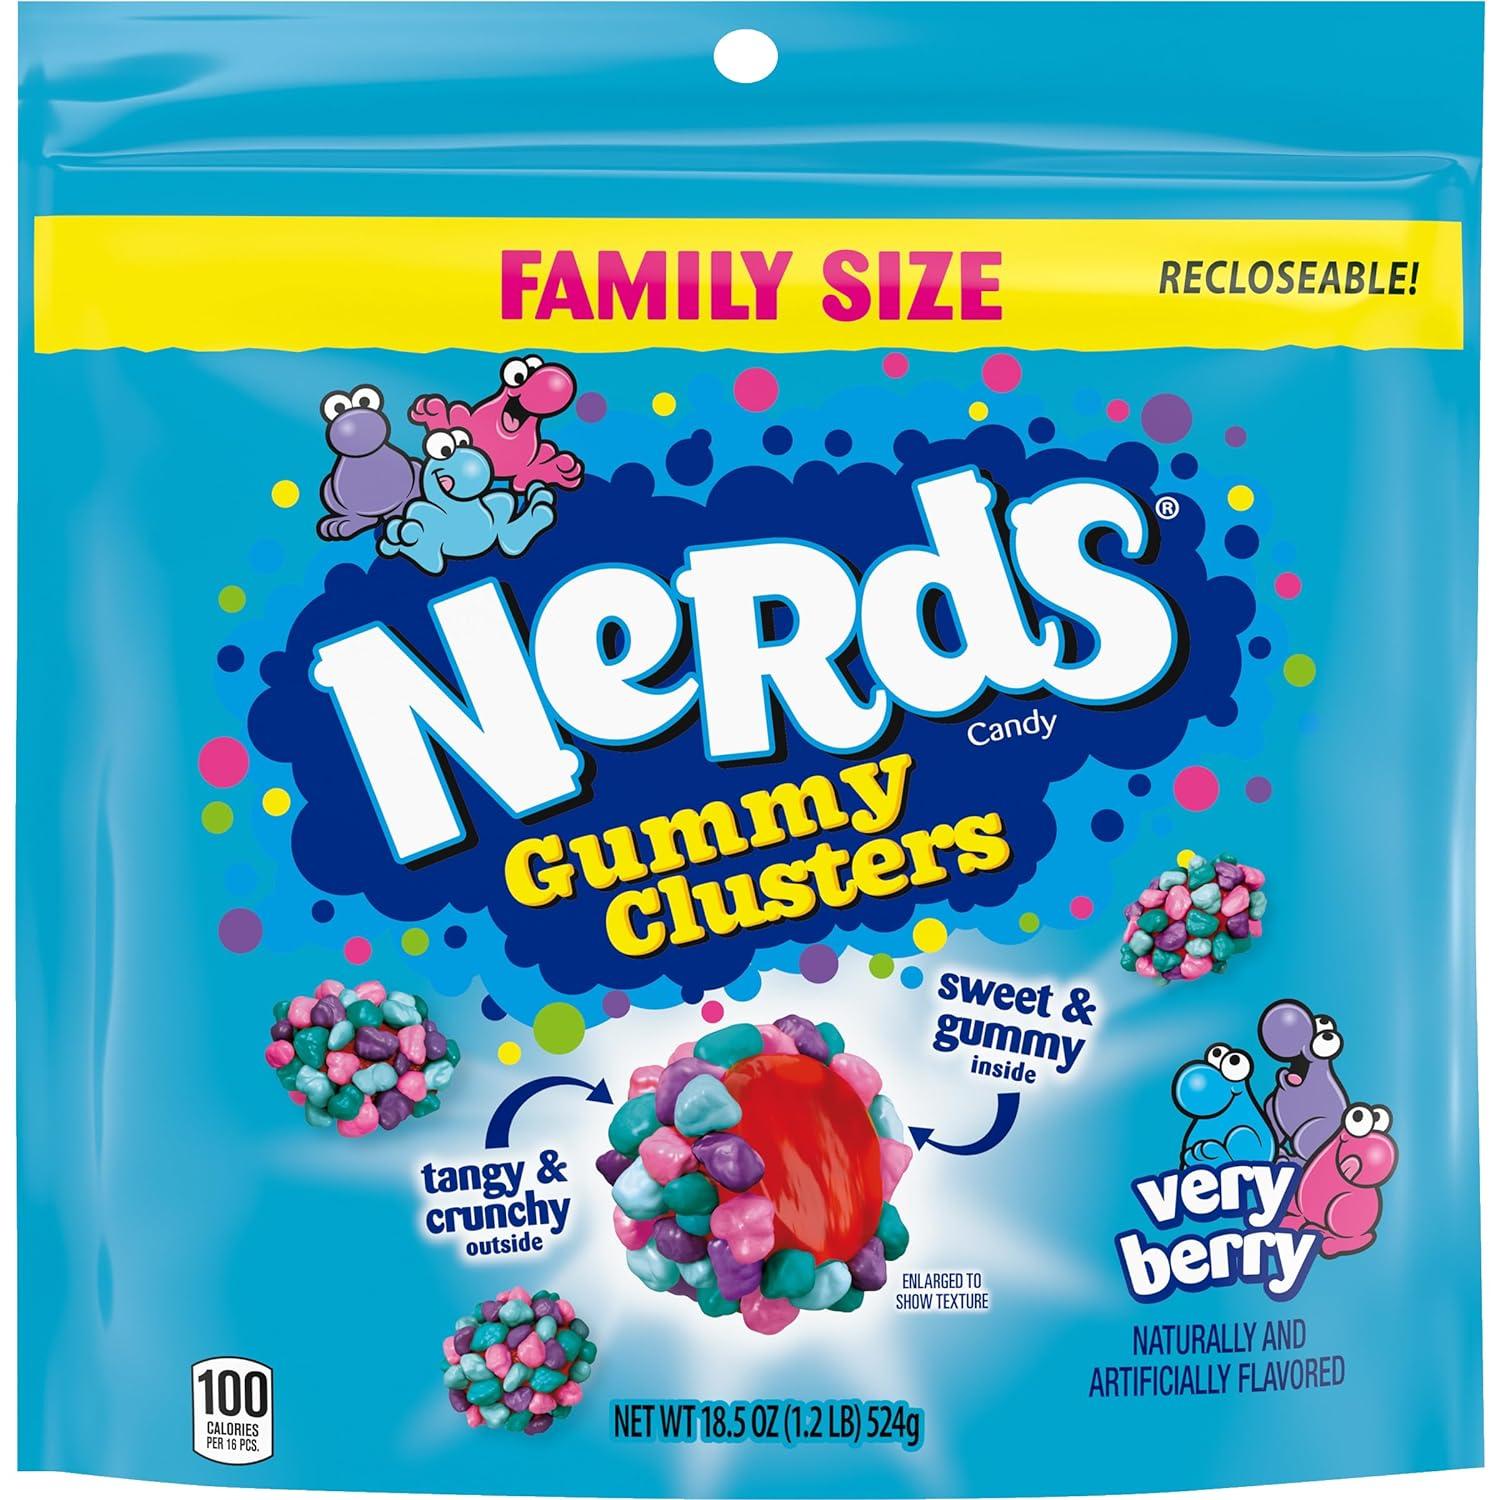 Nerds Gummy Clusters Candy Very Berry 18.5oz for $4.40